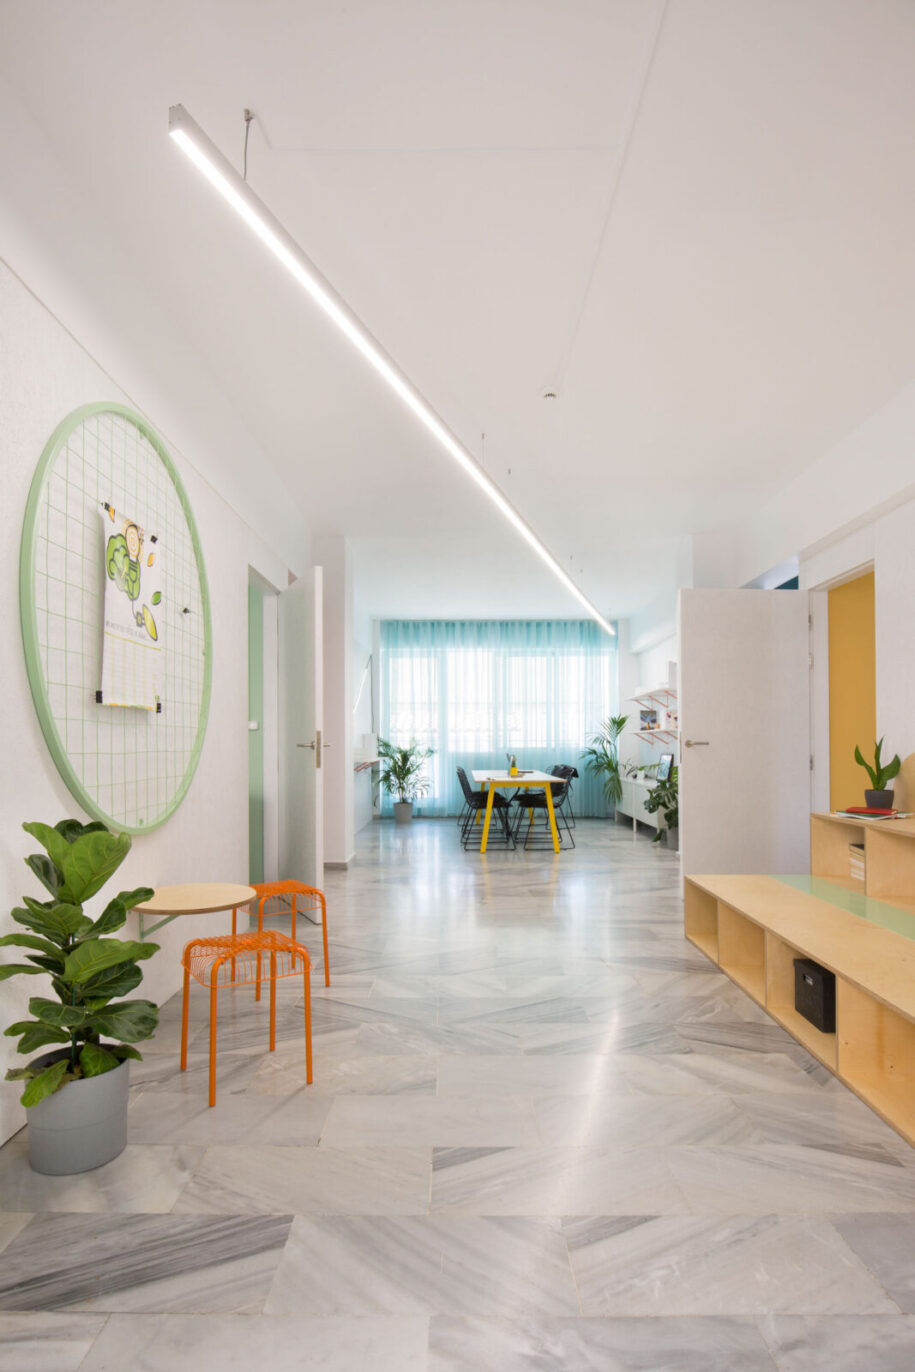 Archisearch Afterschool learning hub in Chalkida: a very big classroom or a very small school by Ksestudio